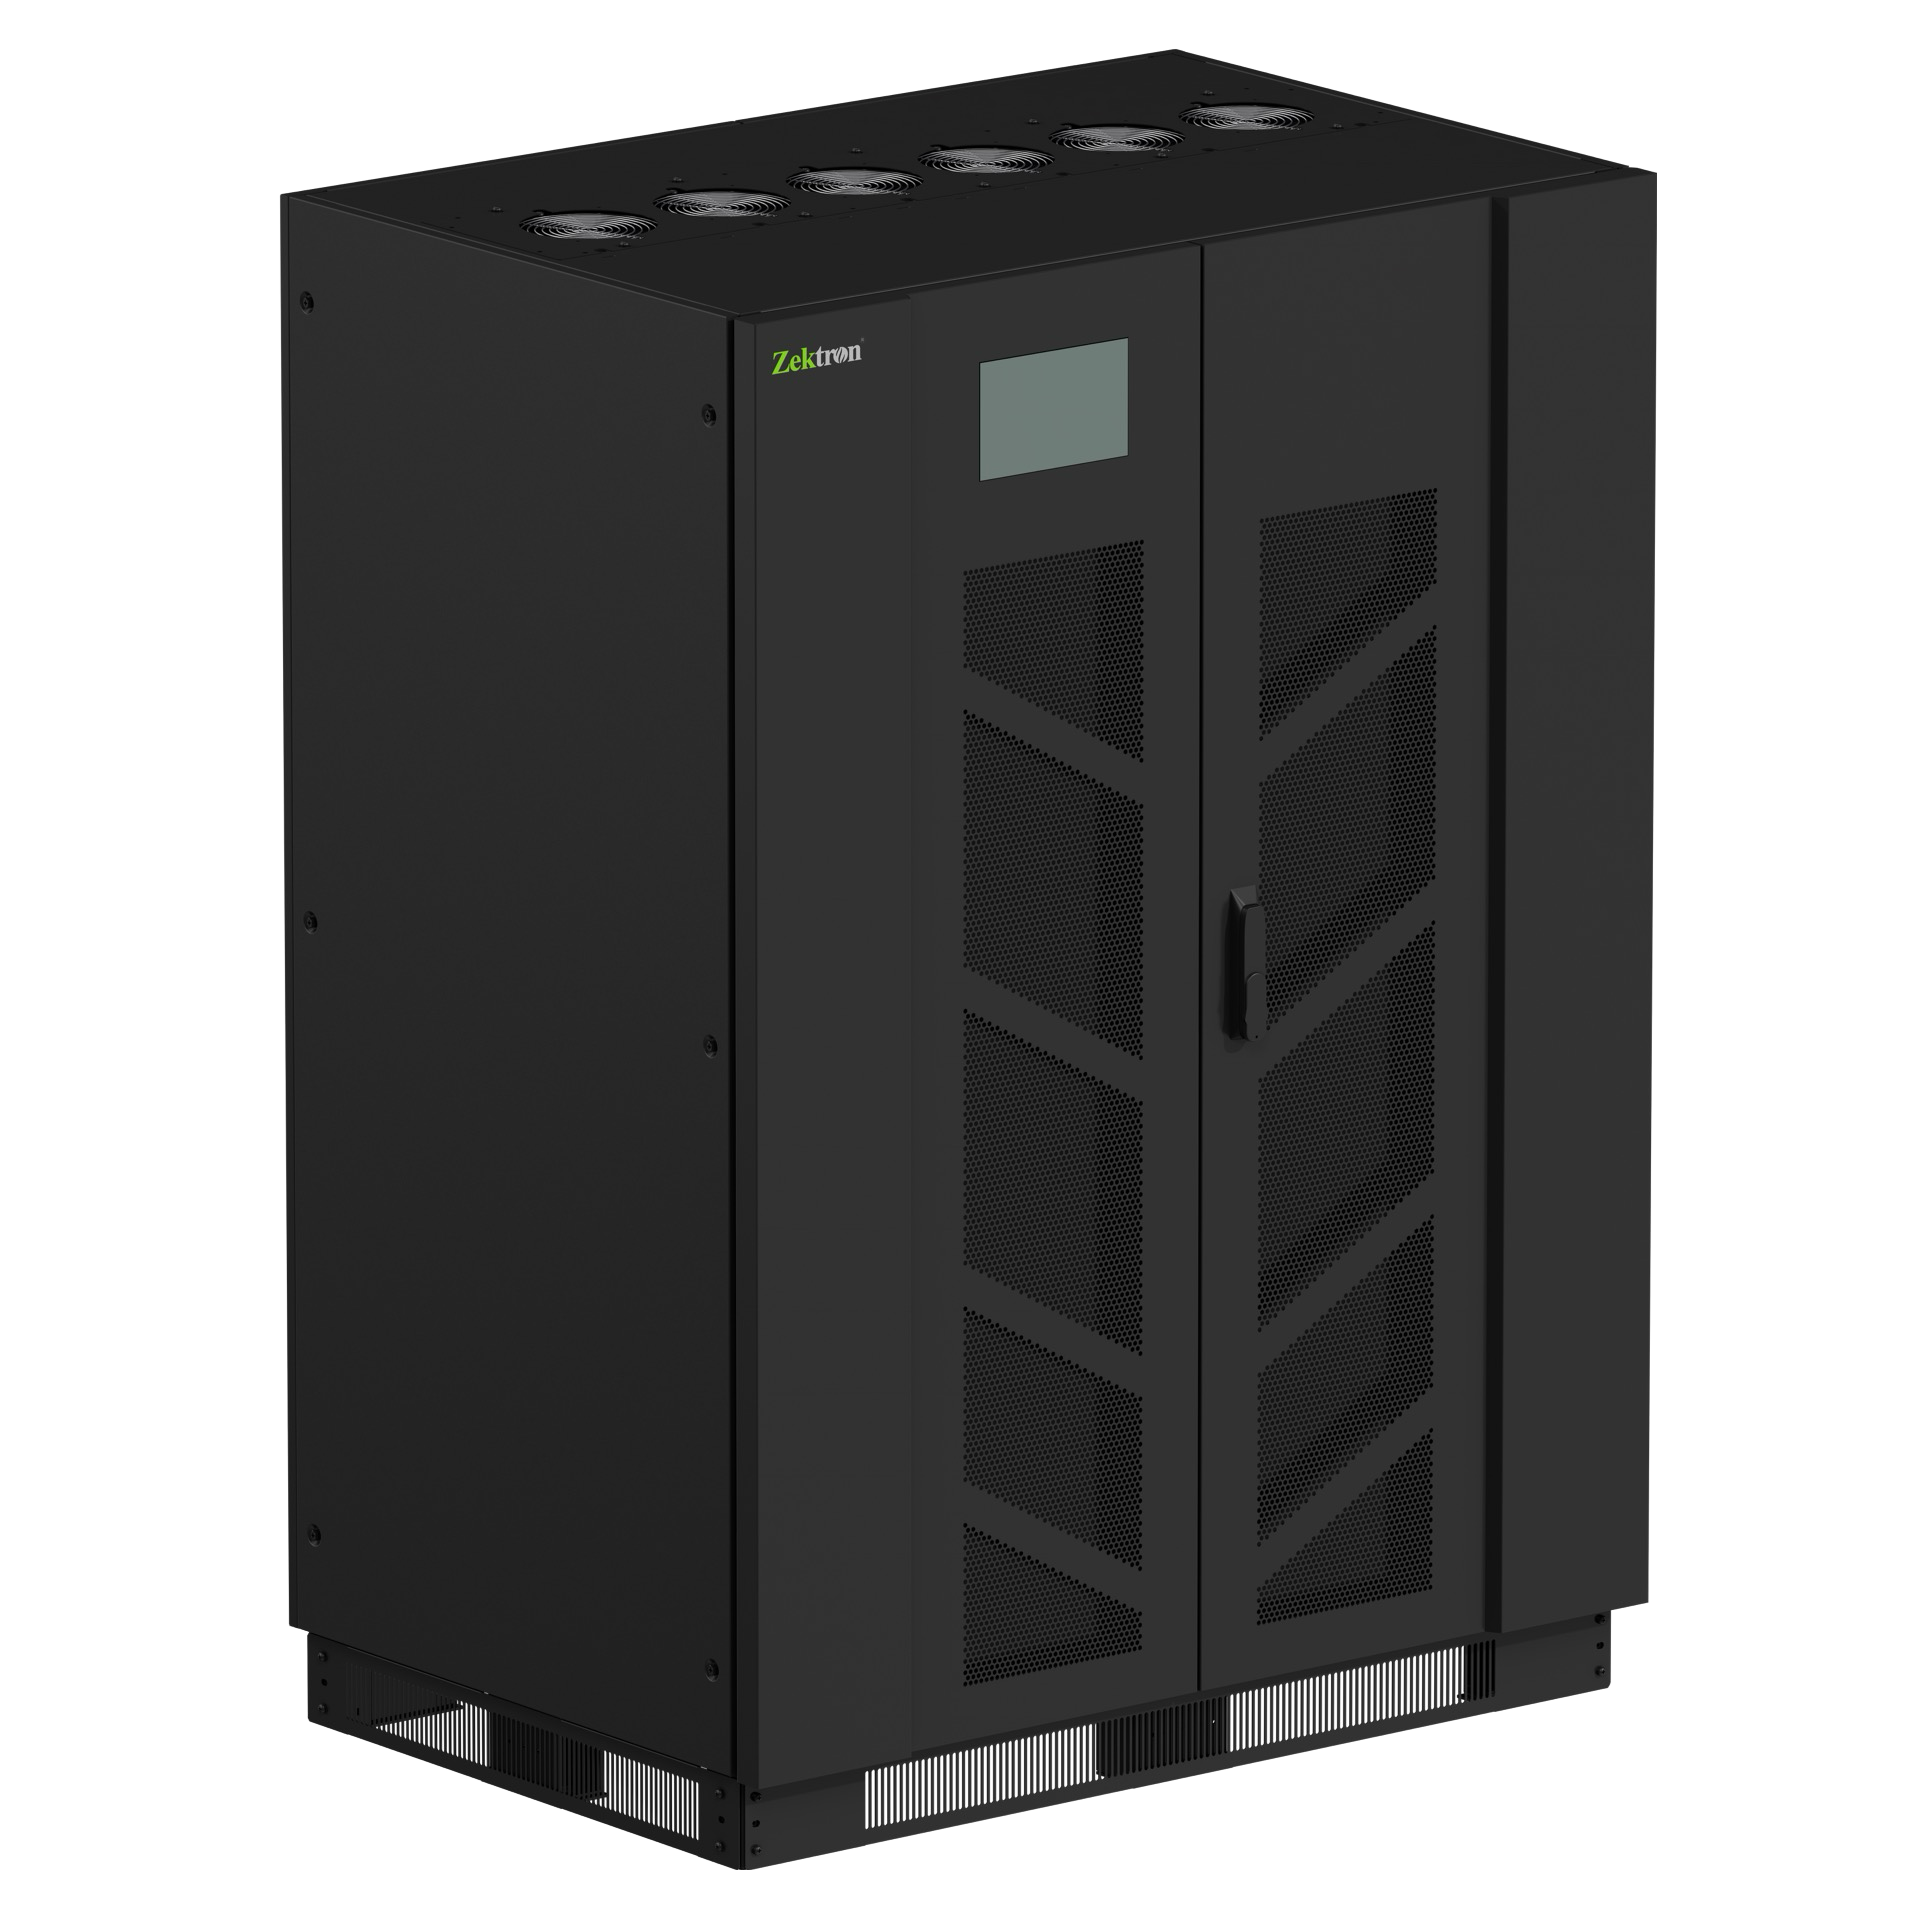 Maximize Your Operations’ Uptime with Zektron Online UPS!